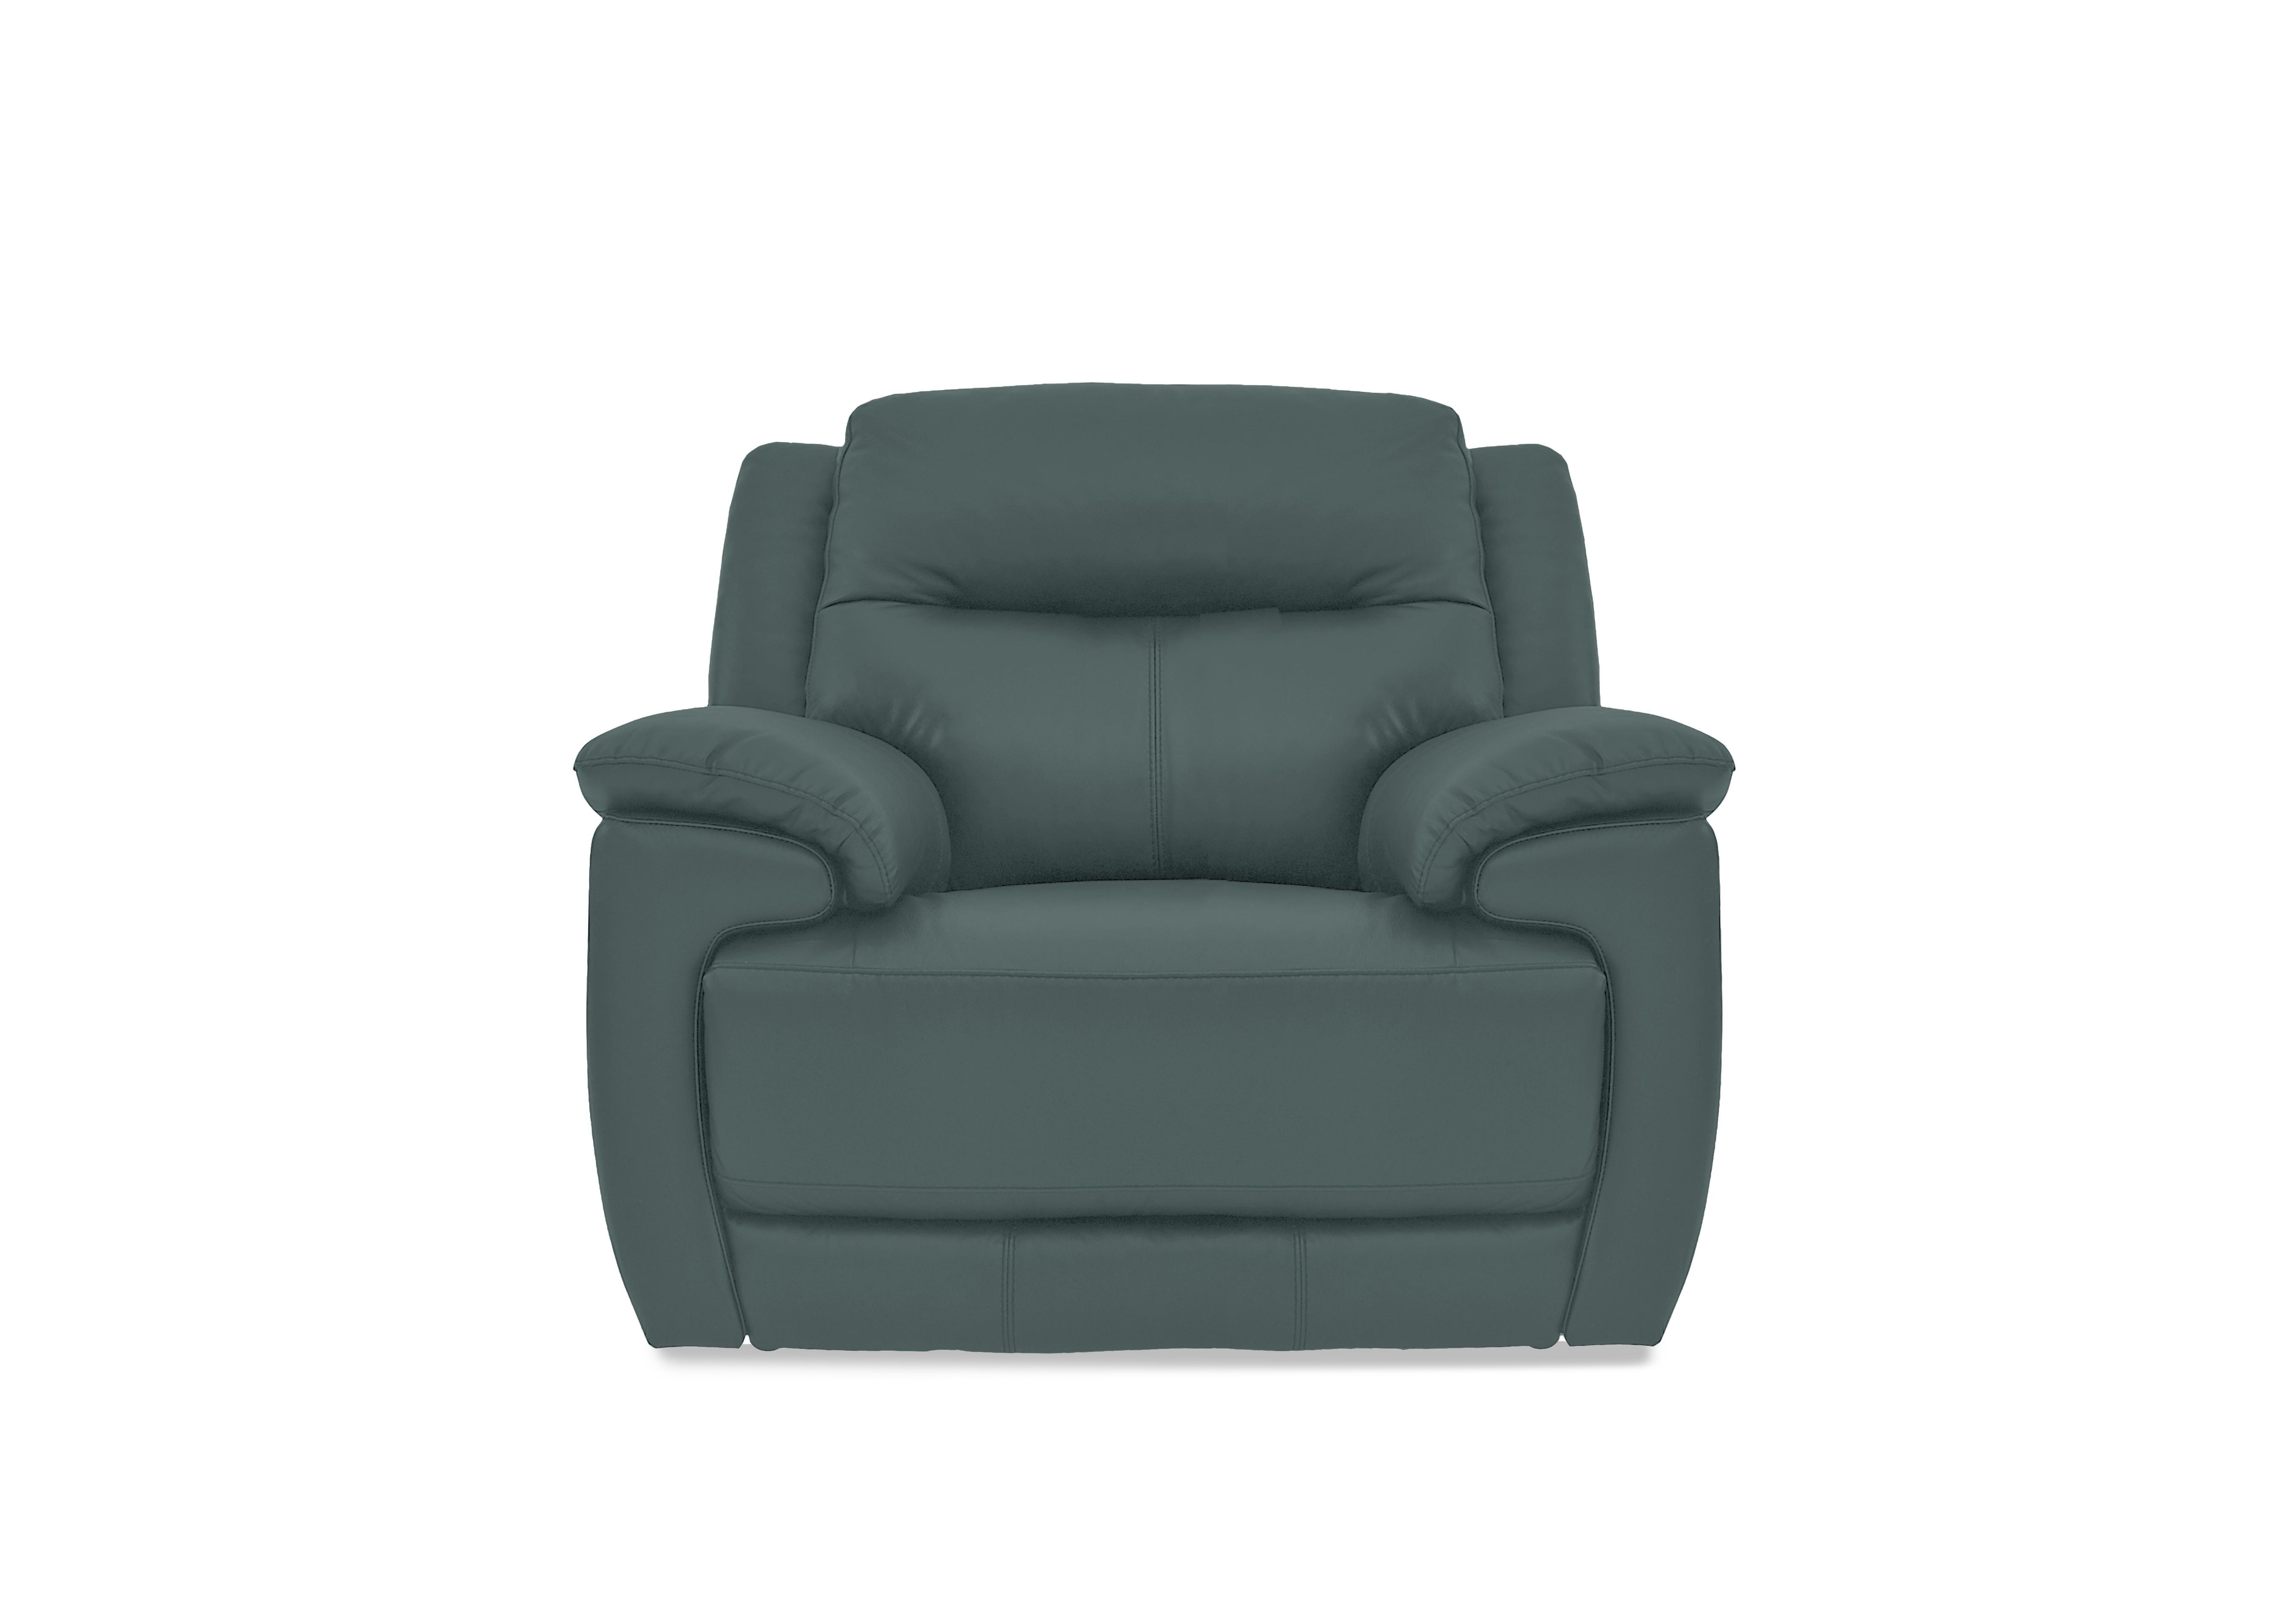 Touch Leather Armchair in Bv-301e Lake Green on Furniture Village